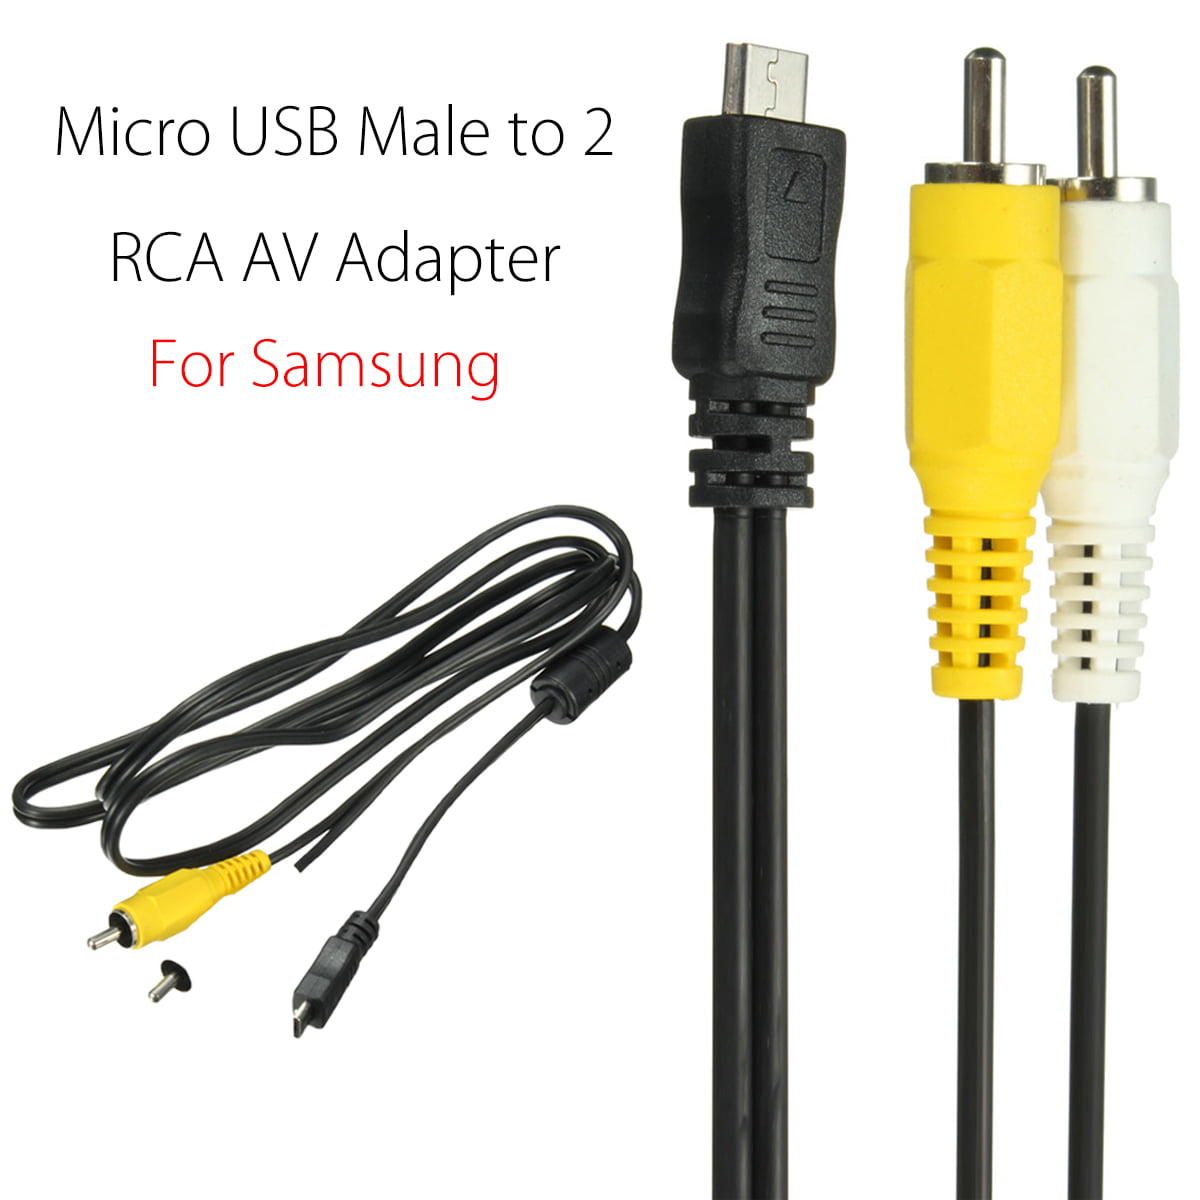 Security Camera Usb To Rca Cable Wiring Diagram from i5.walmartimages.com